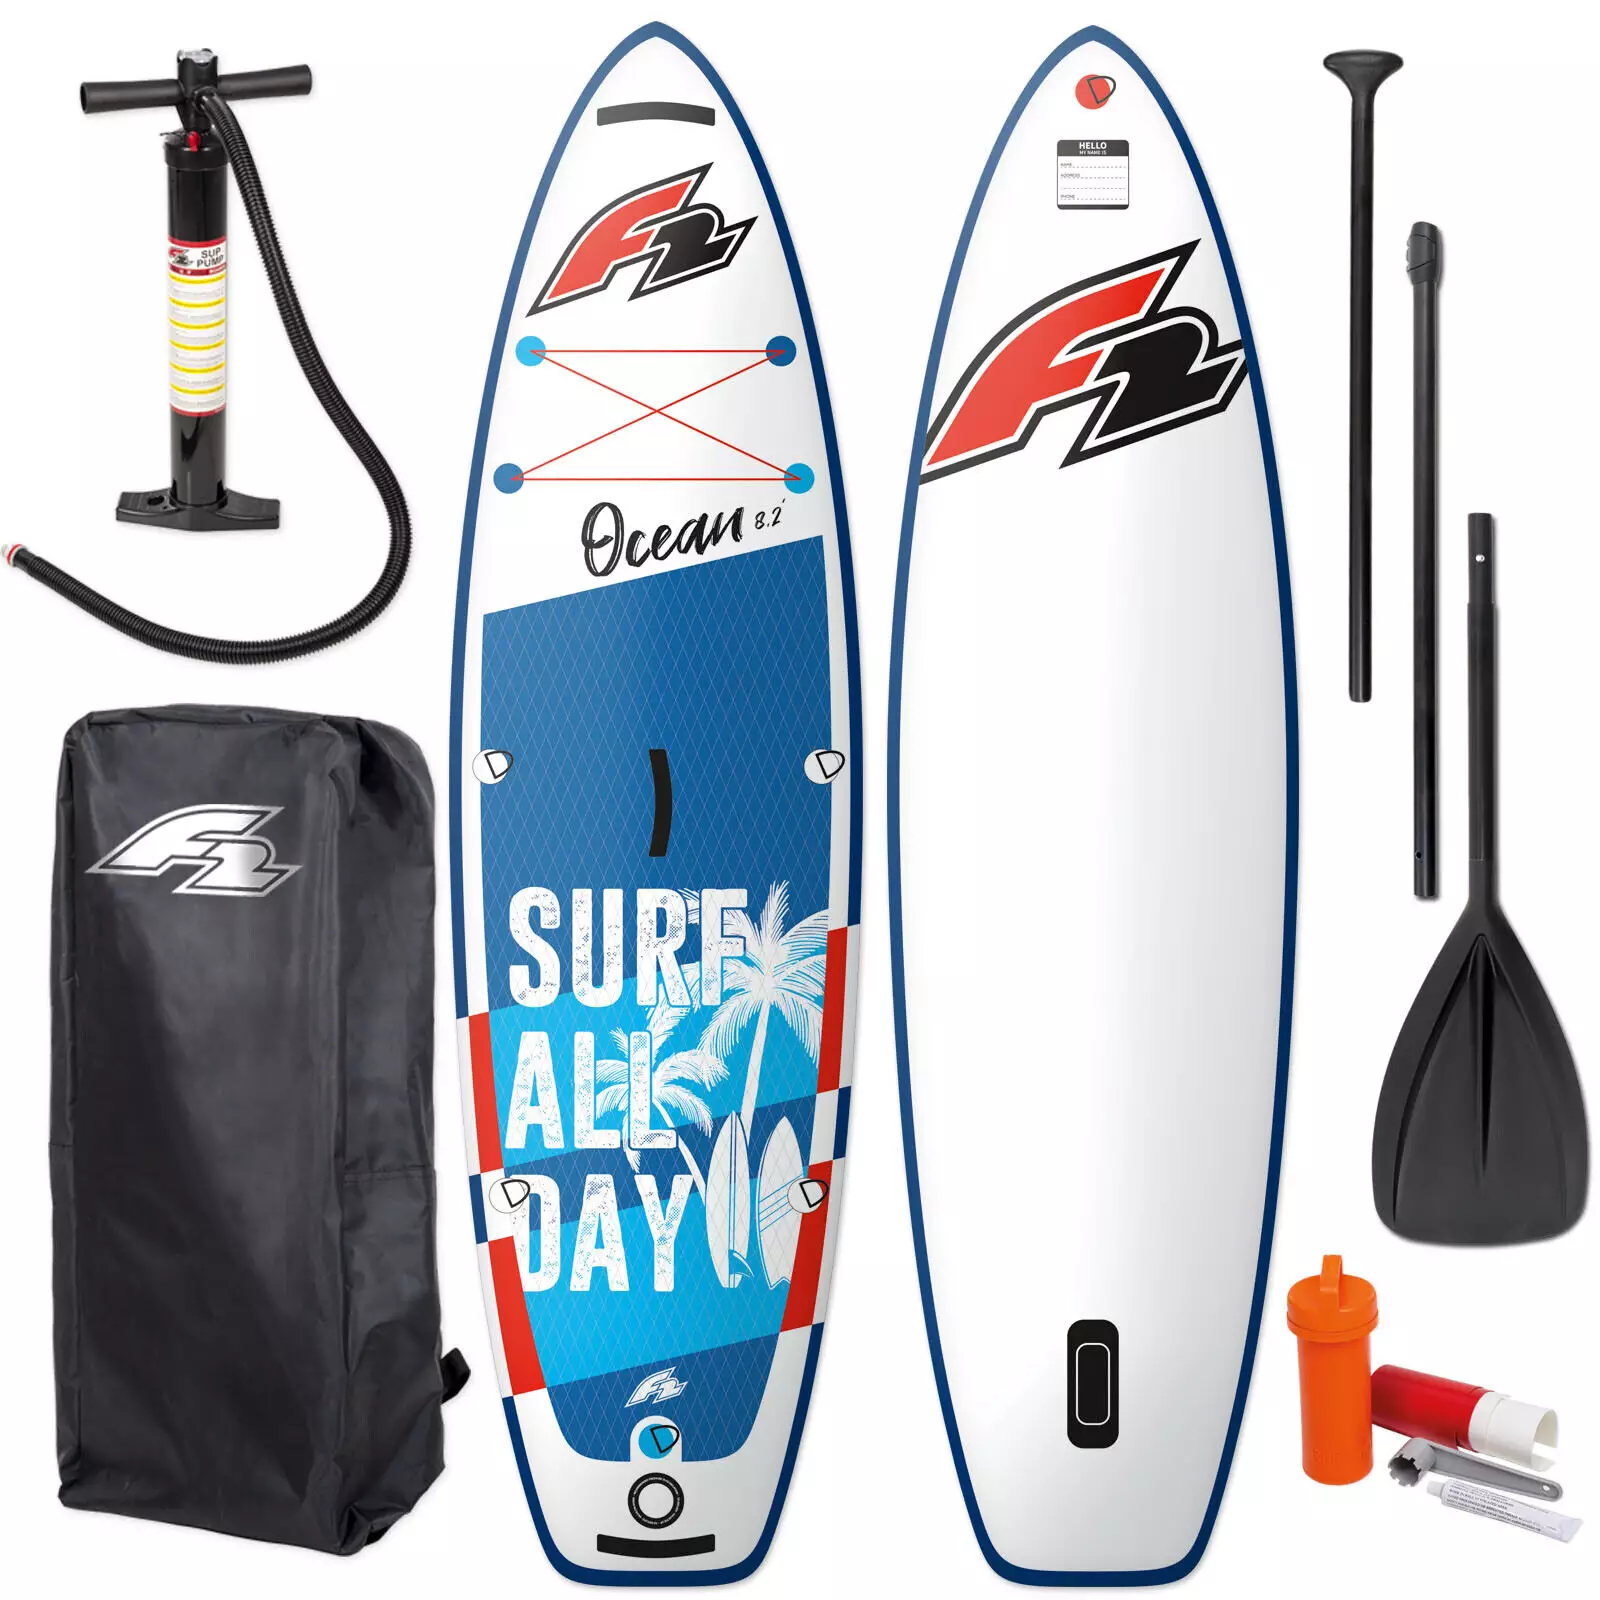 F2 Ocean Kinder SUP - Stand Up Paddle Board